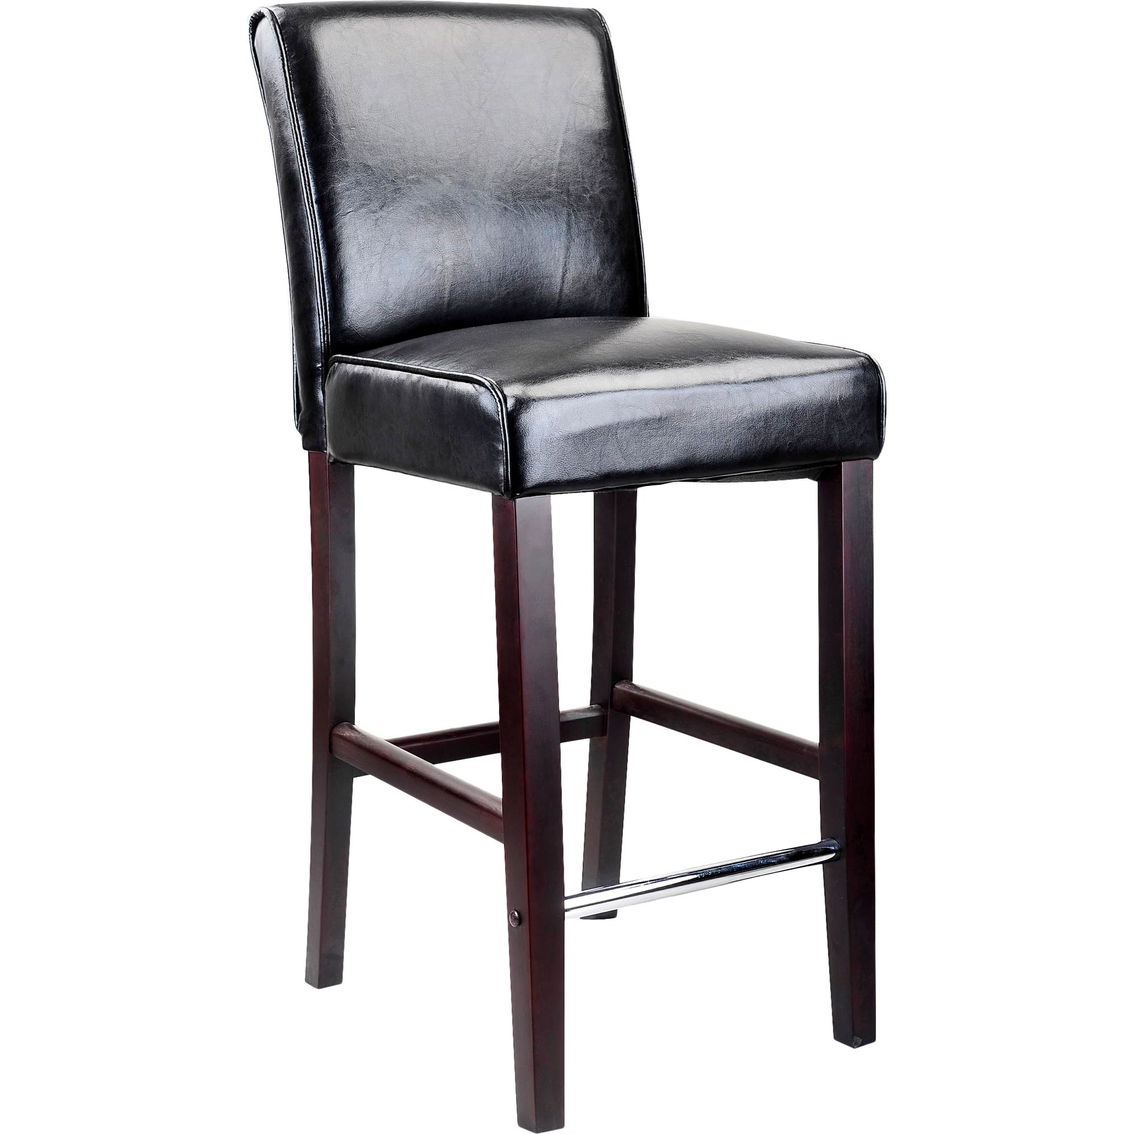 CorLiving Antonio Bar Height Stool in Bonded Leather - Image 2 of 3